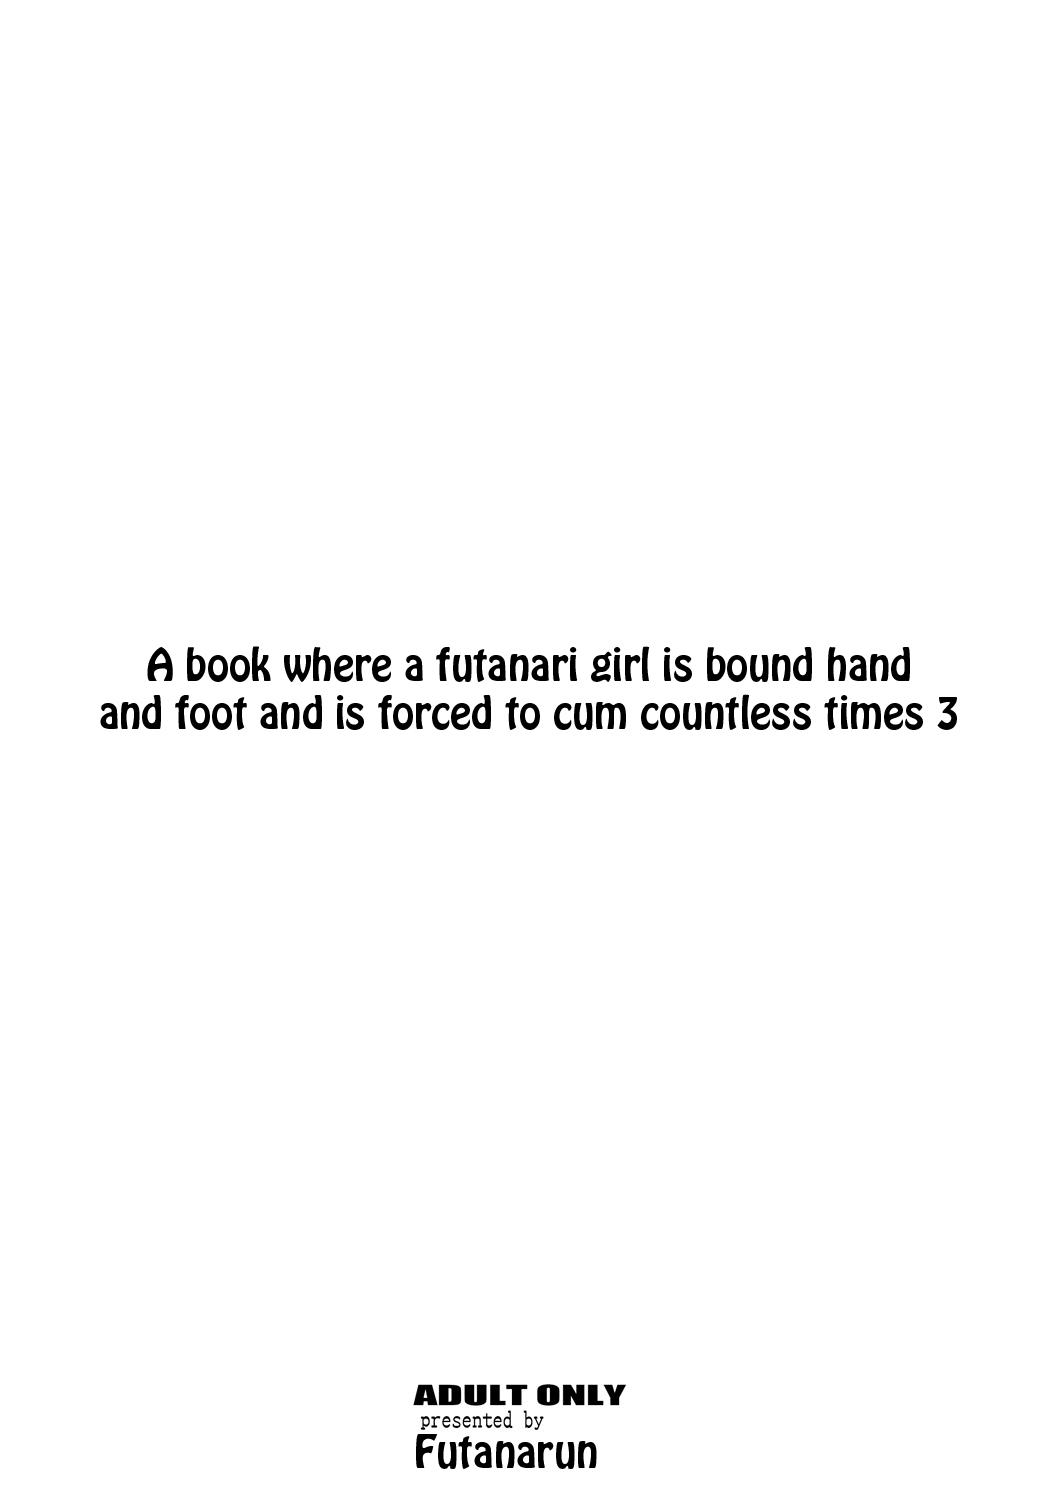 A Book where a Futanari Girl is Bound Hand and Foot and Forced to Cum Countless Times 3 26